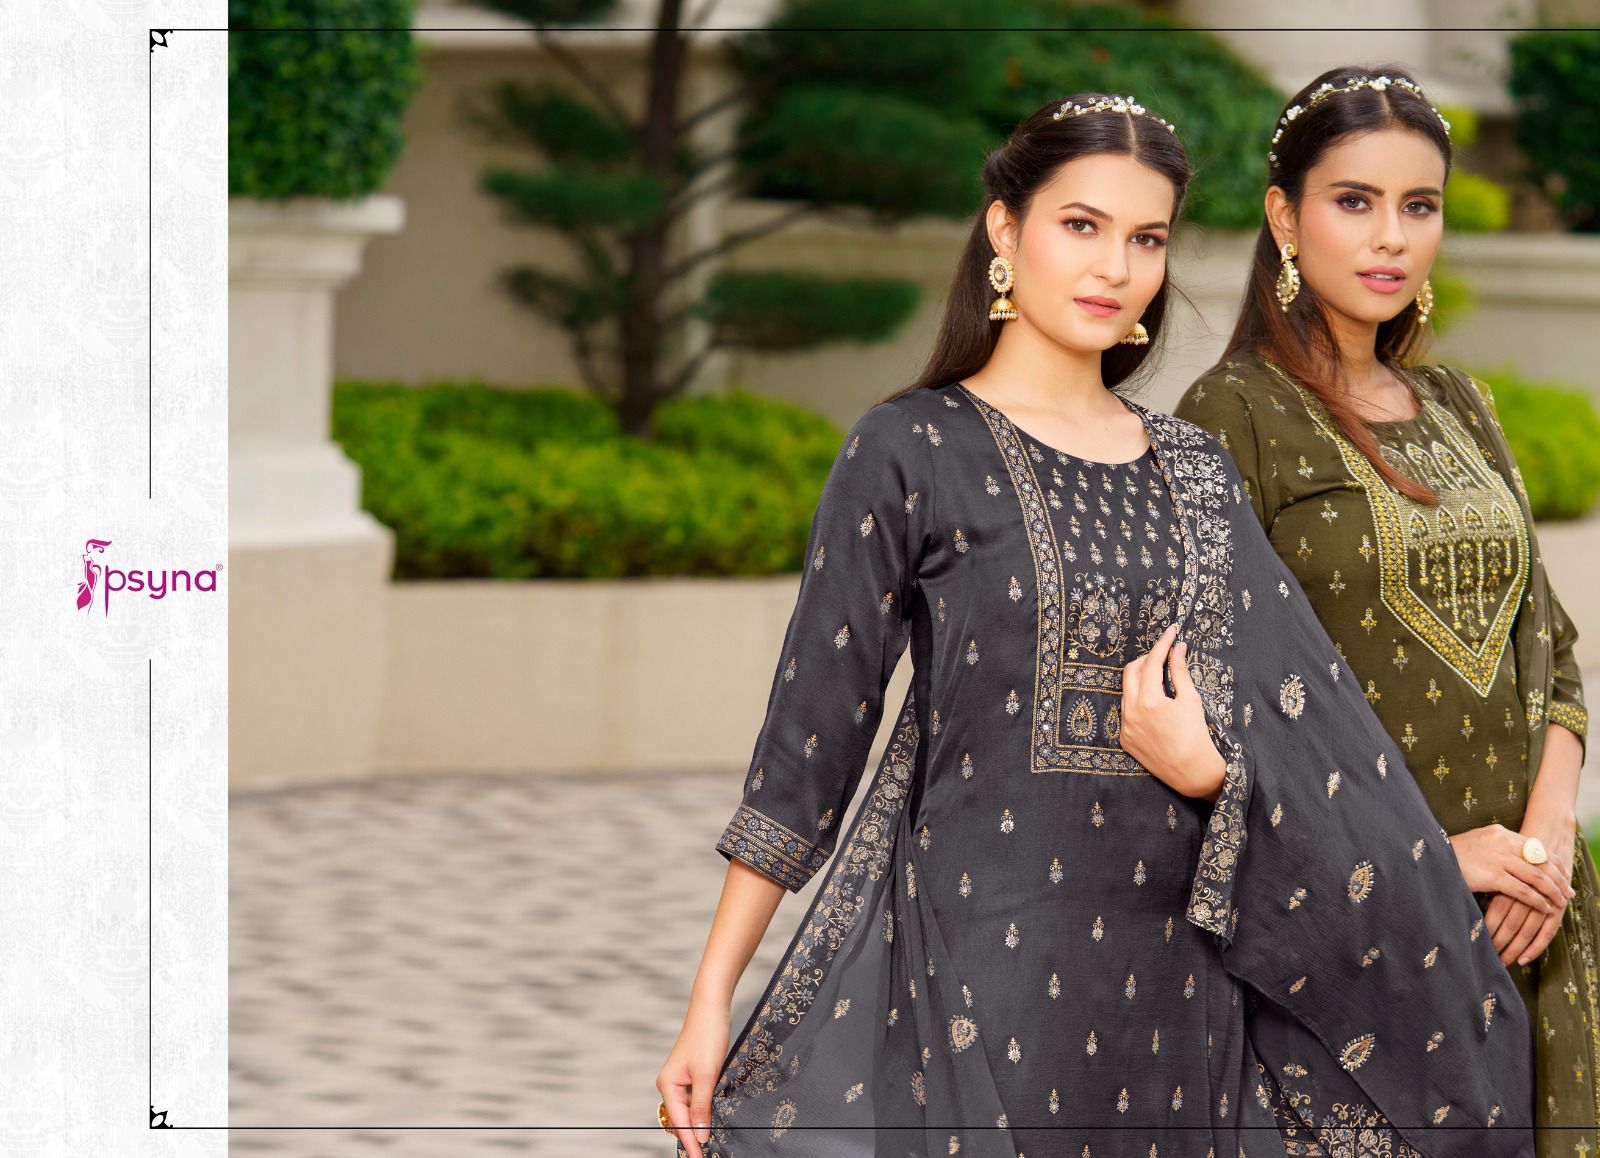 Psyna Silk India collection 3